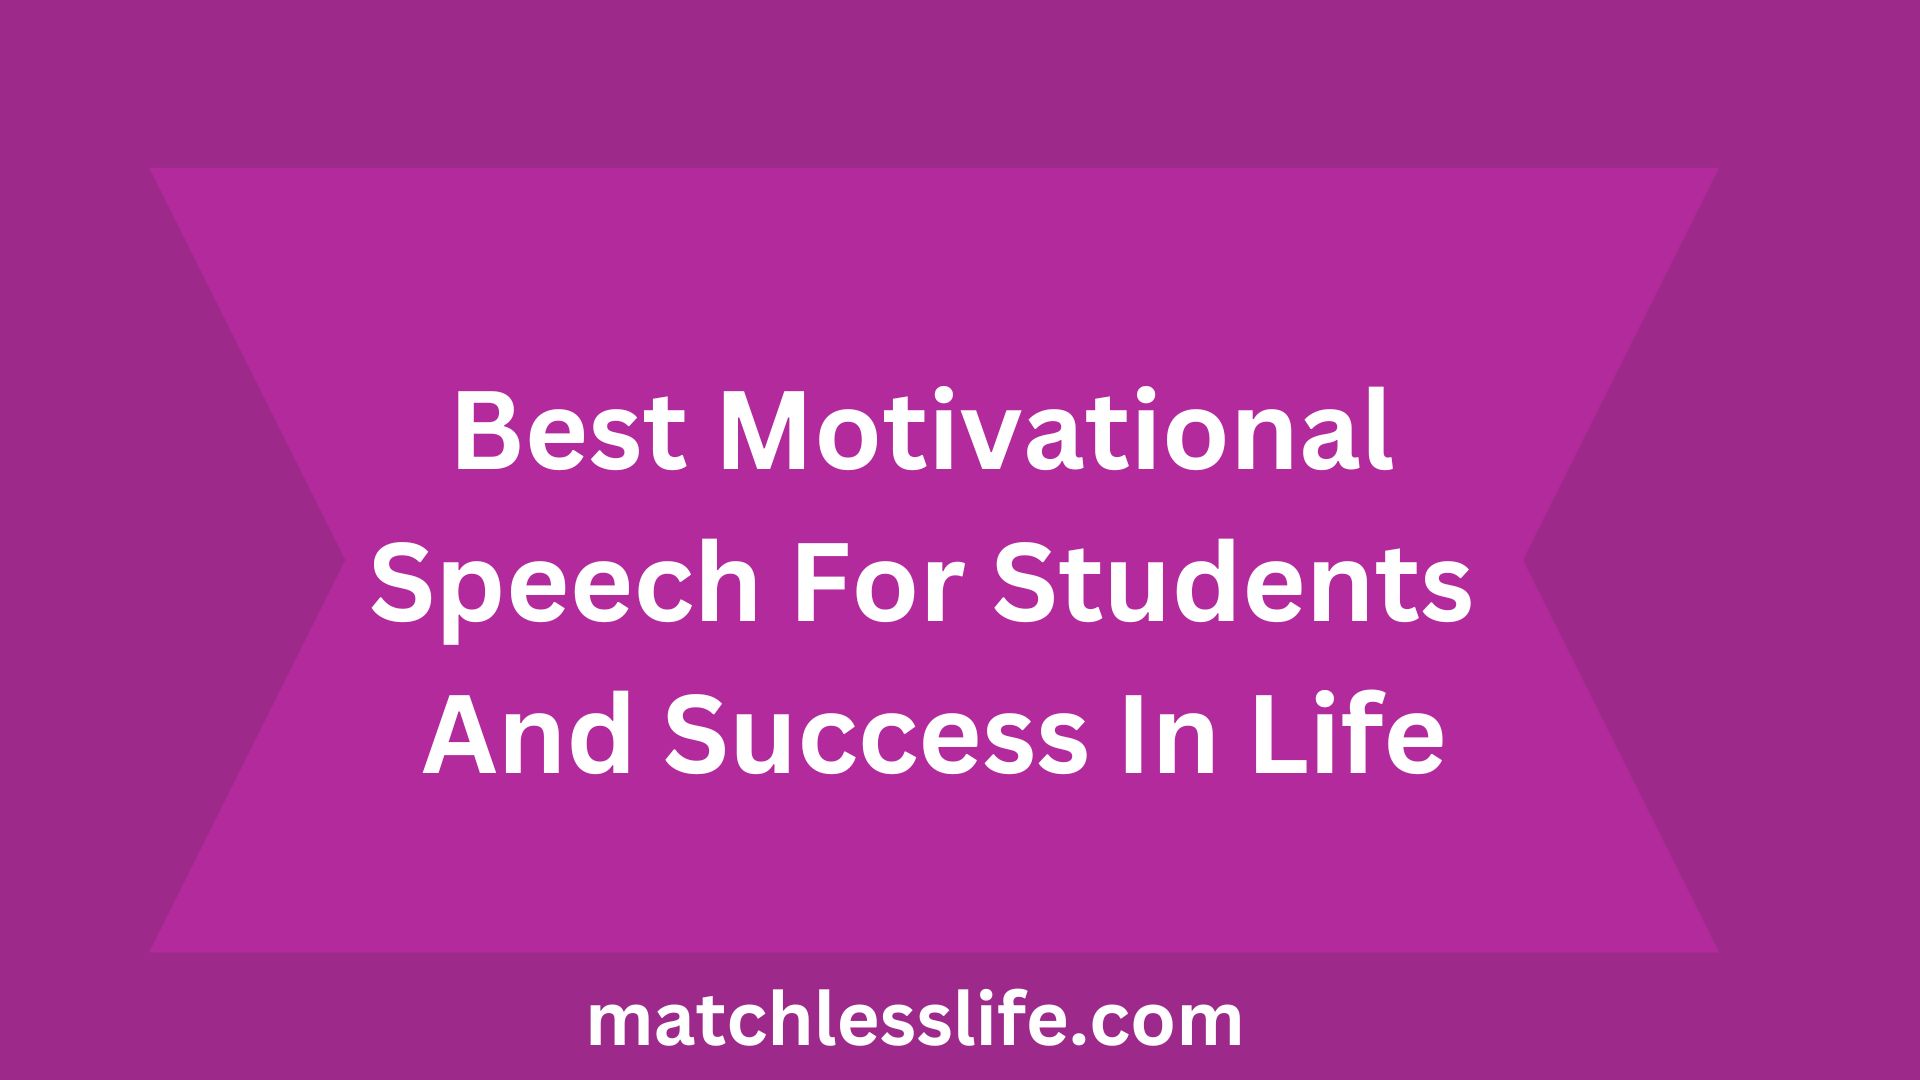 Best Motivational Speech For Students And Success In Life